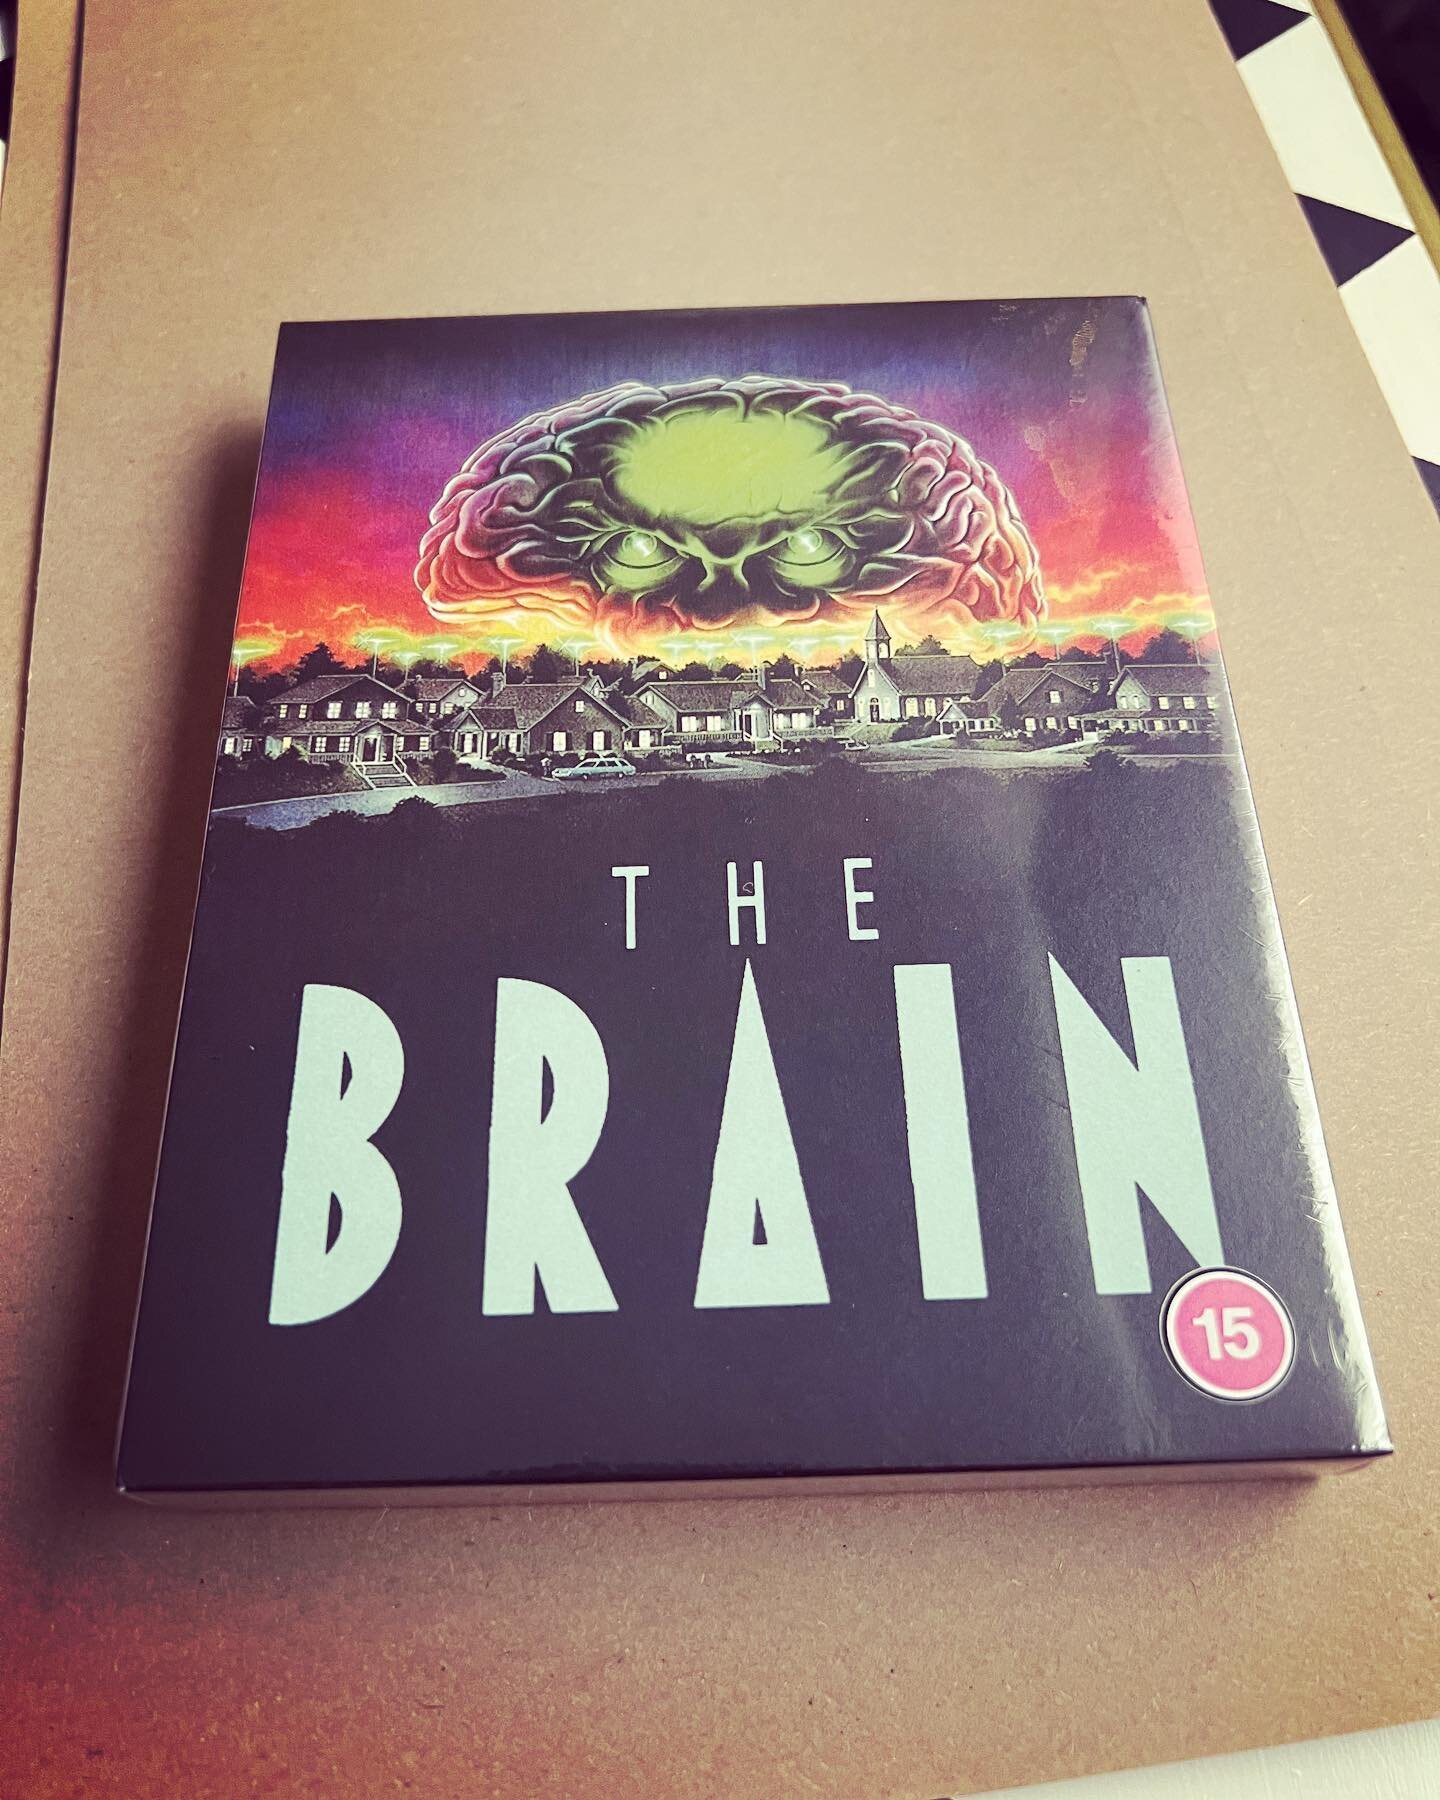 Ahhhh 🧠 @101films great release we worked on!